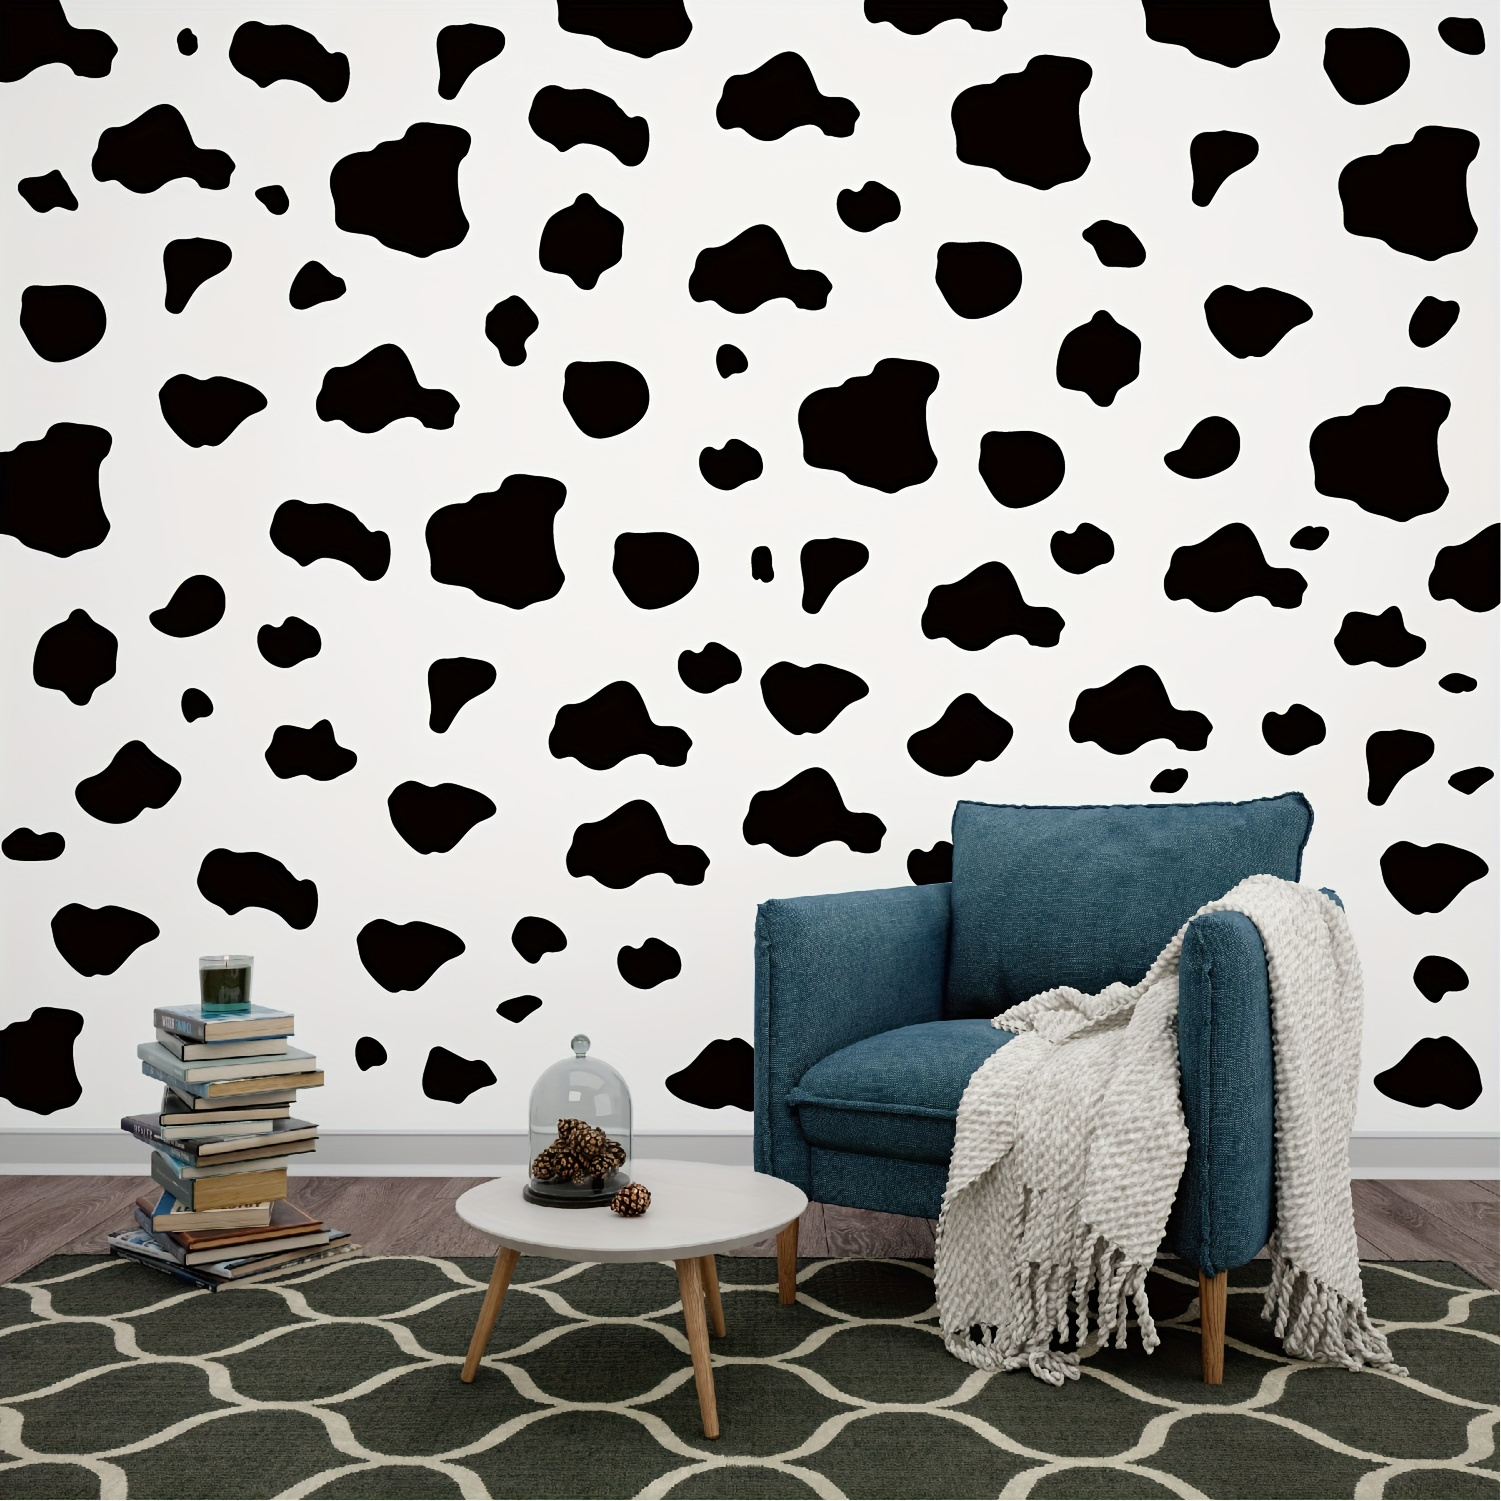 

56pcs/2 Sheets New Hot Black And White Cow Spotted Pvc Waterproof Sticker Handbook Computer Decorative Sticker Brighten Up Your Child's Room With Geometric Cow Wall Sticker Paper